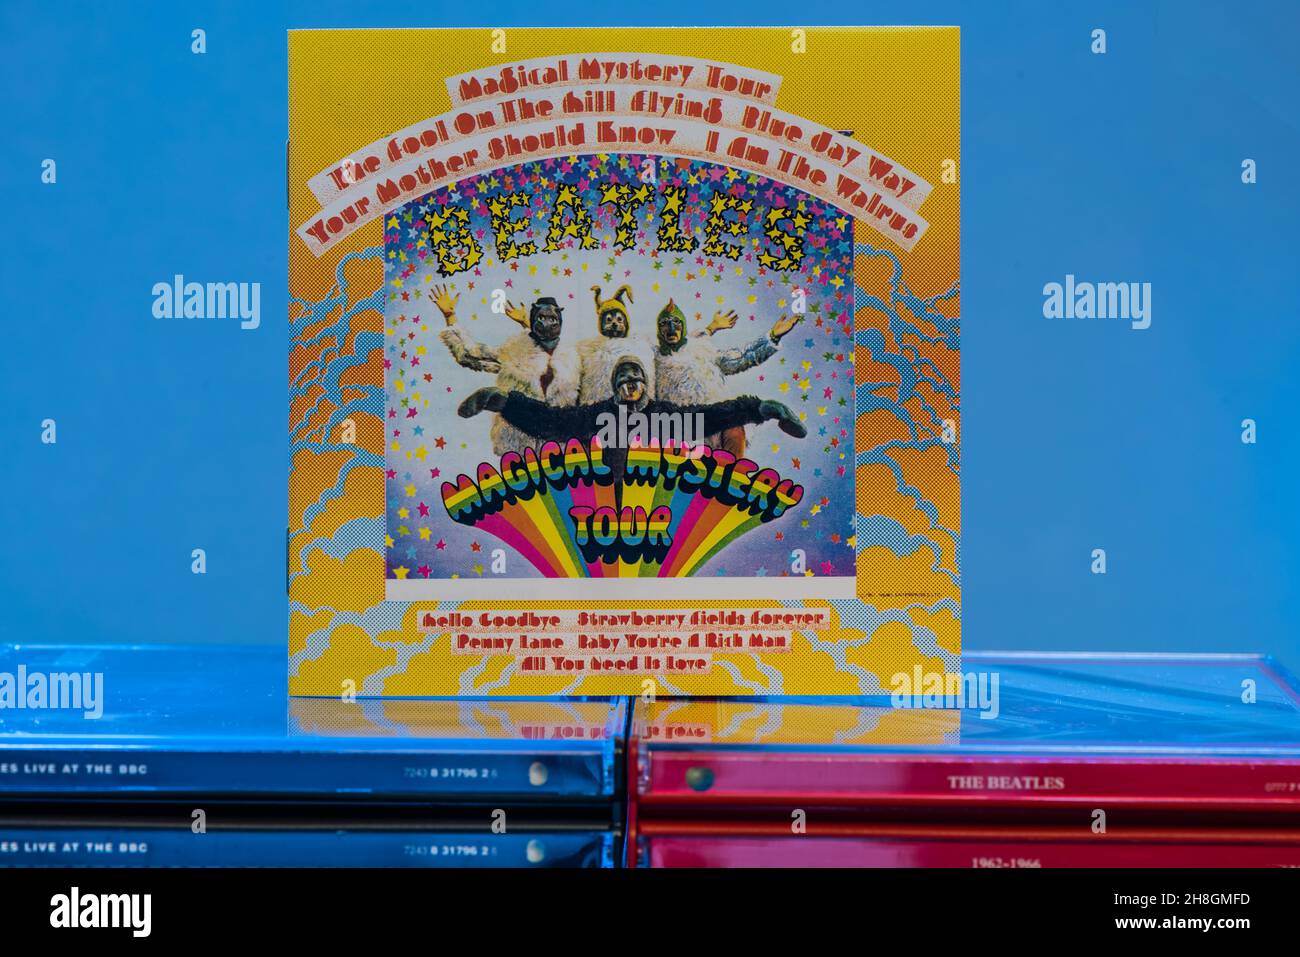 EMI CD  Disc Inlay - Magical Mystery Tour by the Beatles. Stock Photo